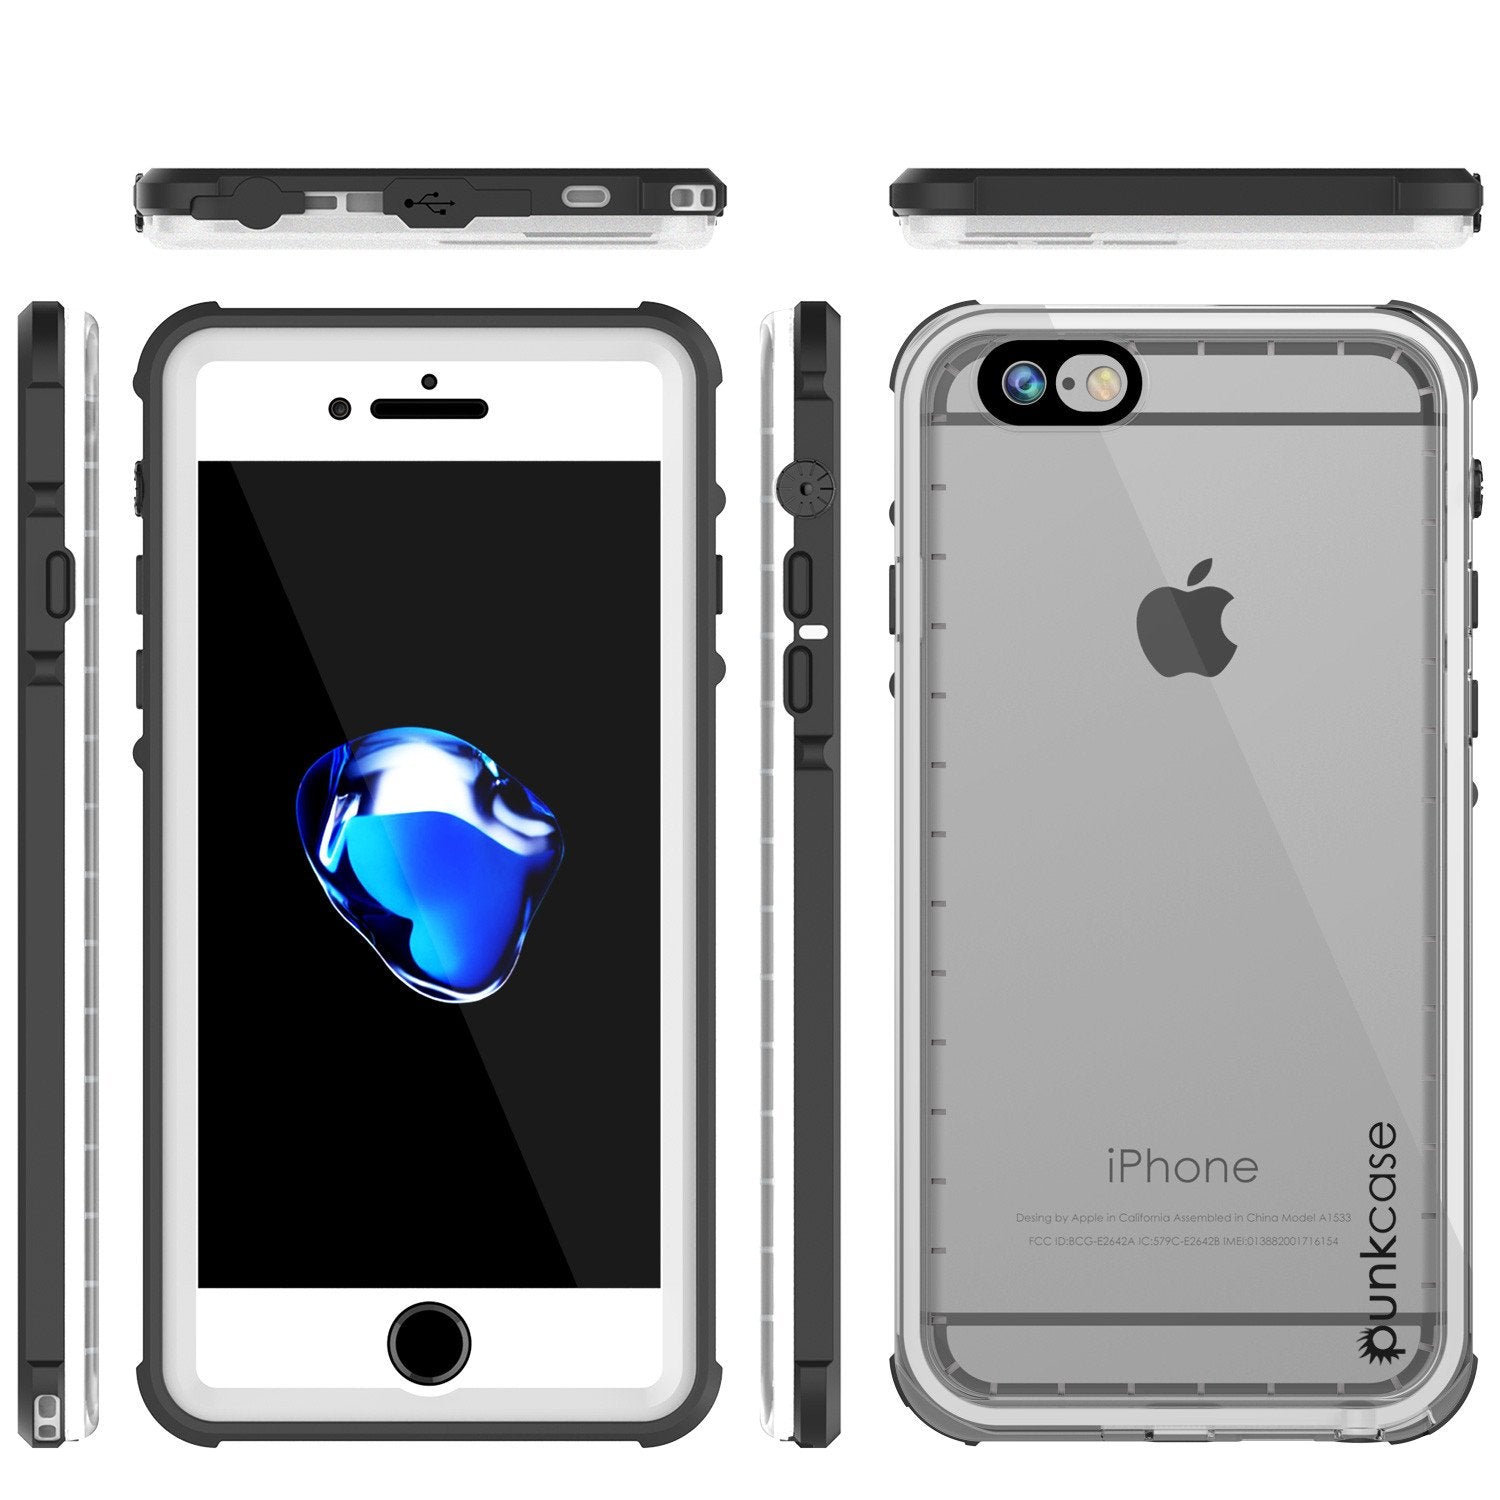 Apple iPhone 7 Waterproof Case, PUNKcase CRYSTAL White W/ Attached Screen Protector  | Warranty